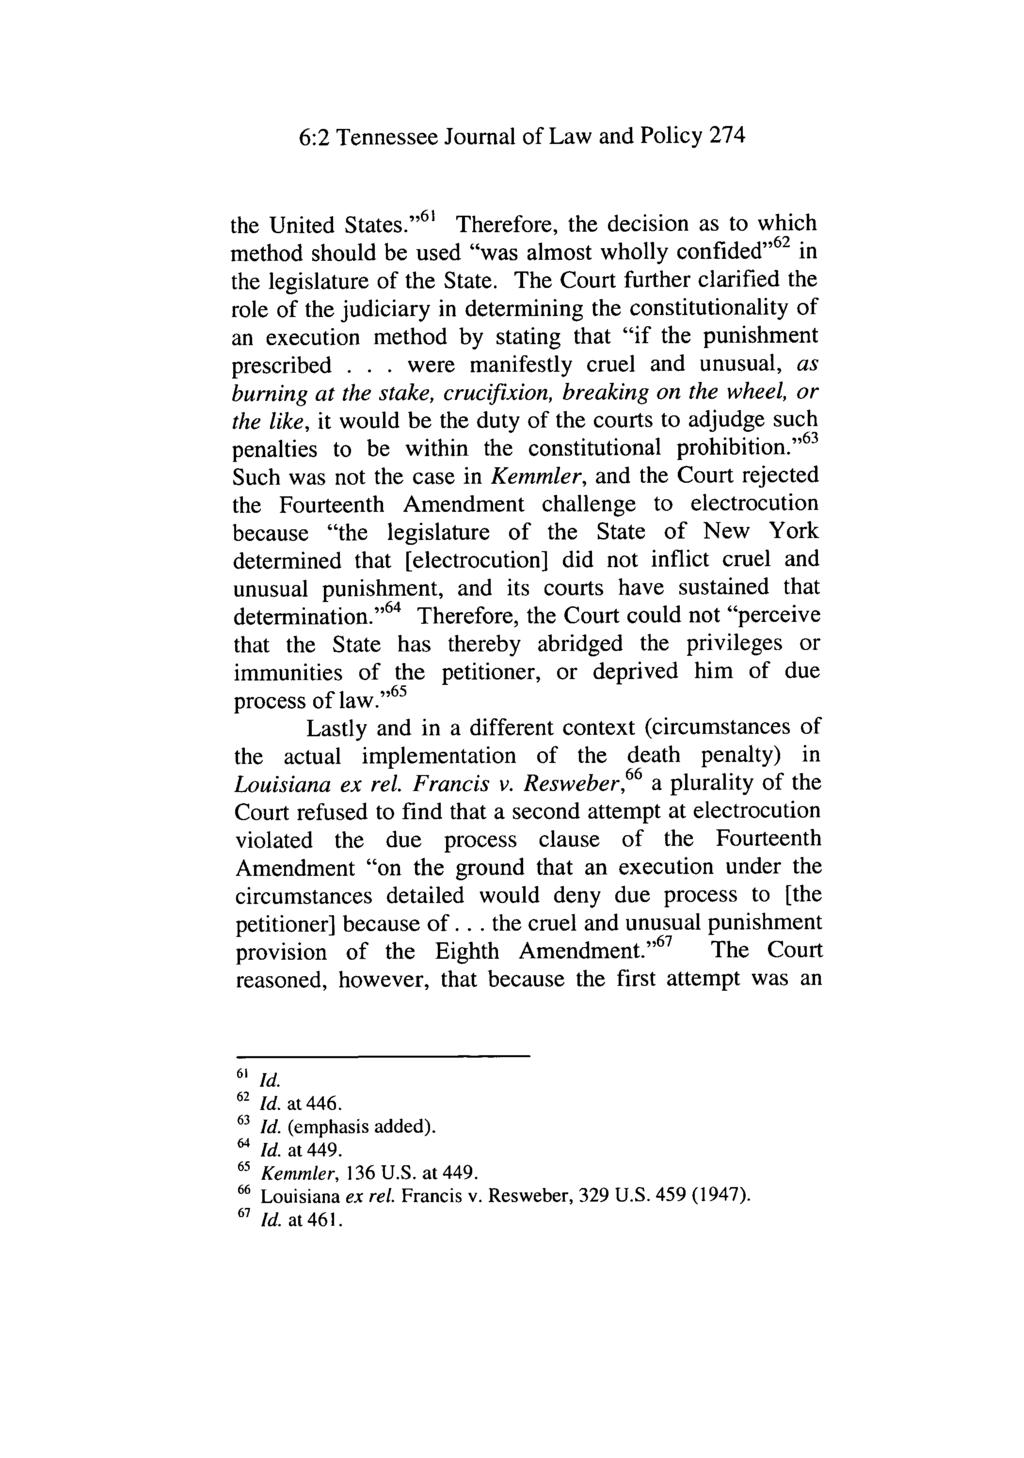 Tennessee Journal of Law and Policy, Vol. 6, Iss. 2 [2014], Art. 6 6:2 Tennessee Journal of Law and Policy 274 the United States.